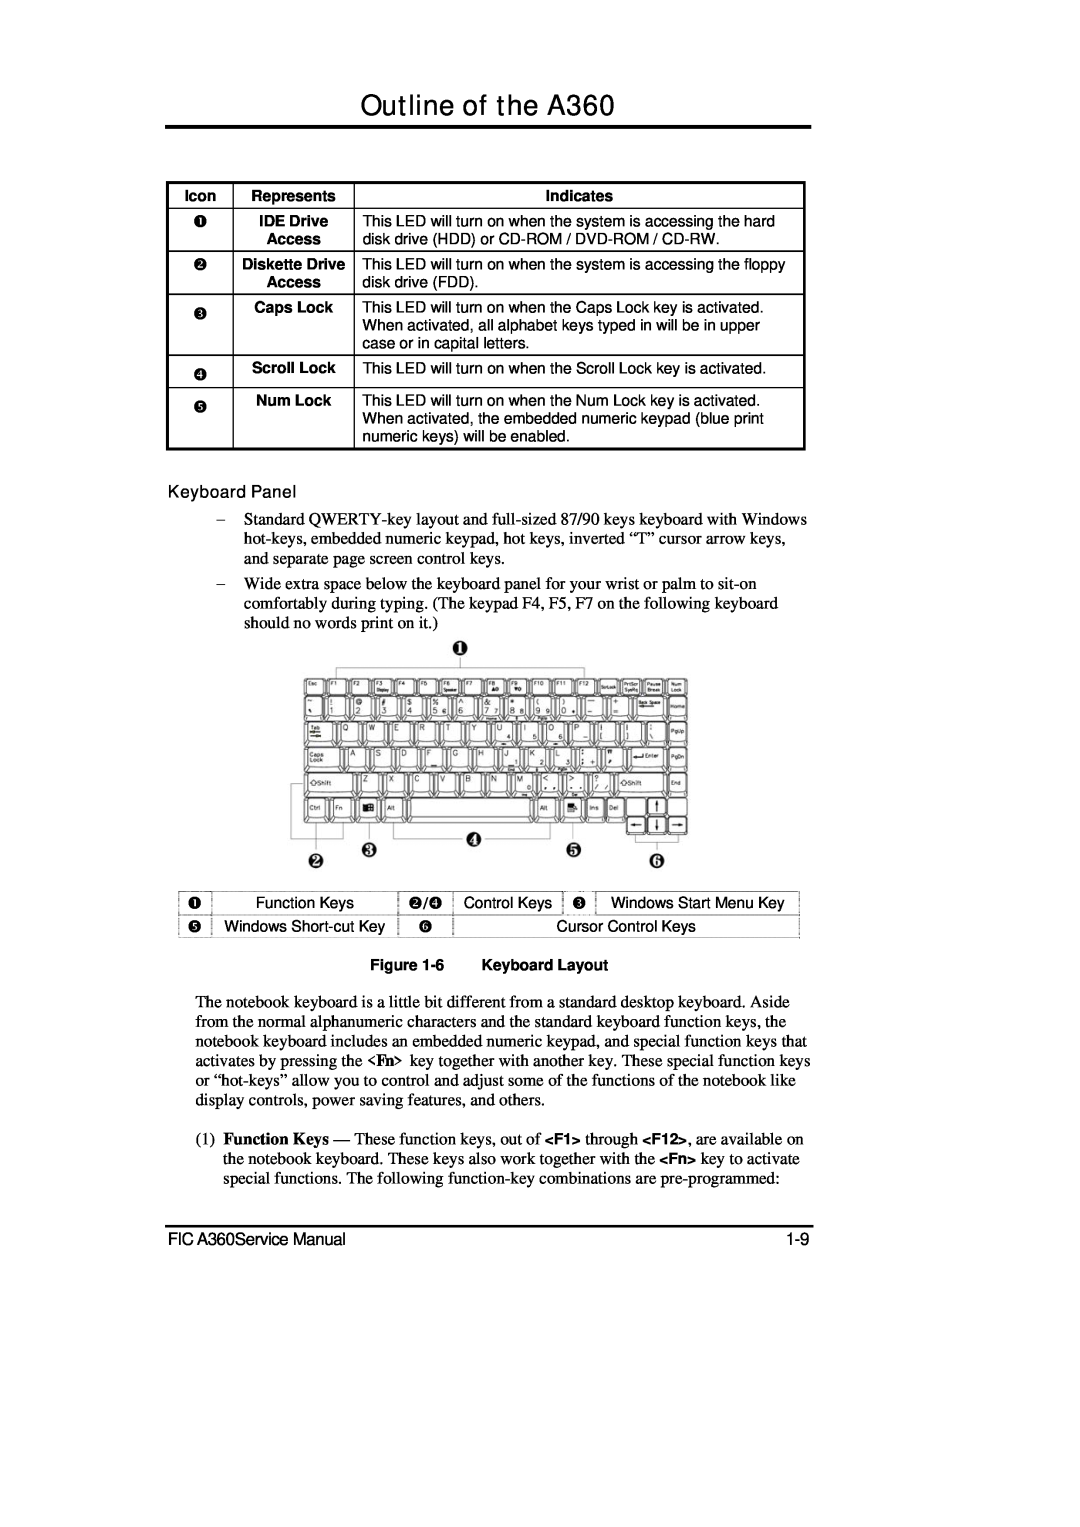 FIC service manual Outline of the A360, Keyboard Panel, o /q 